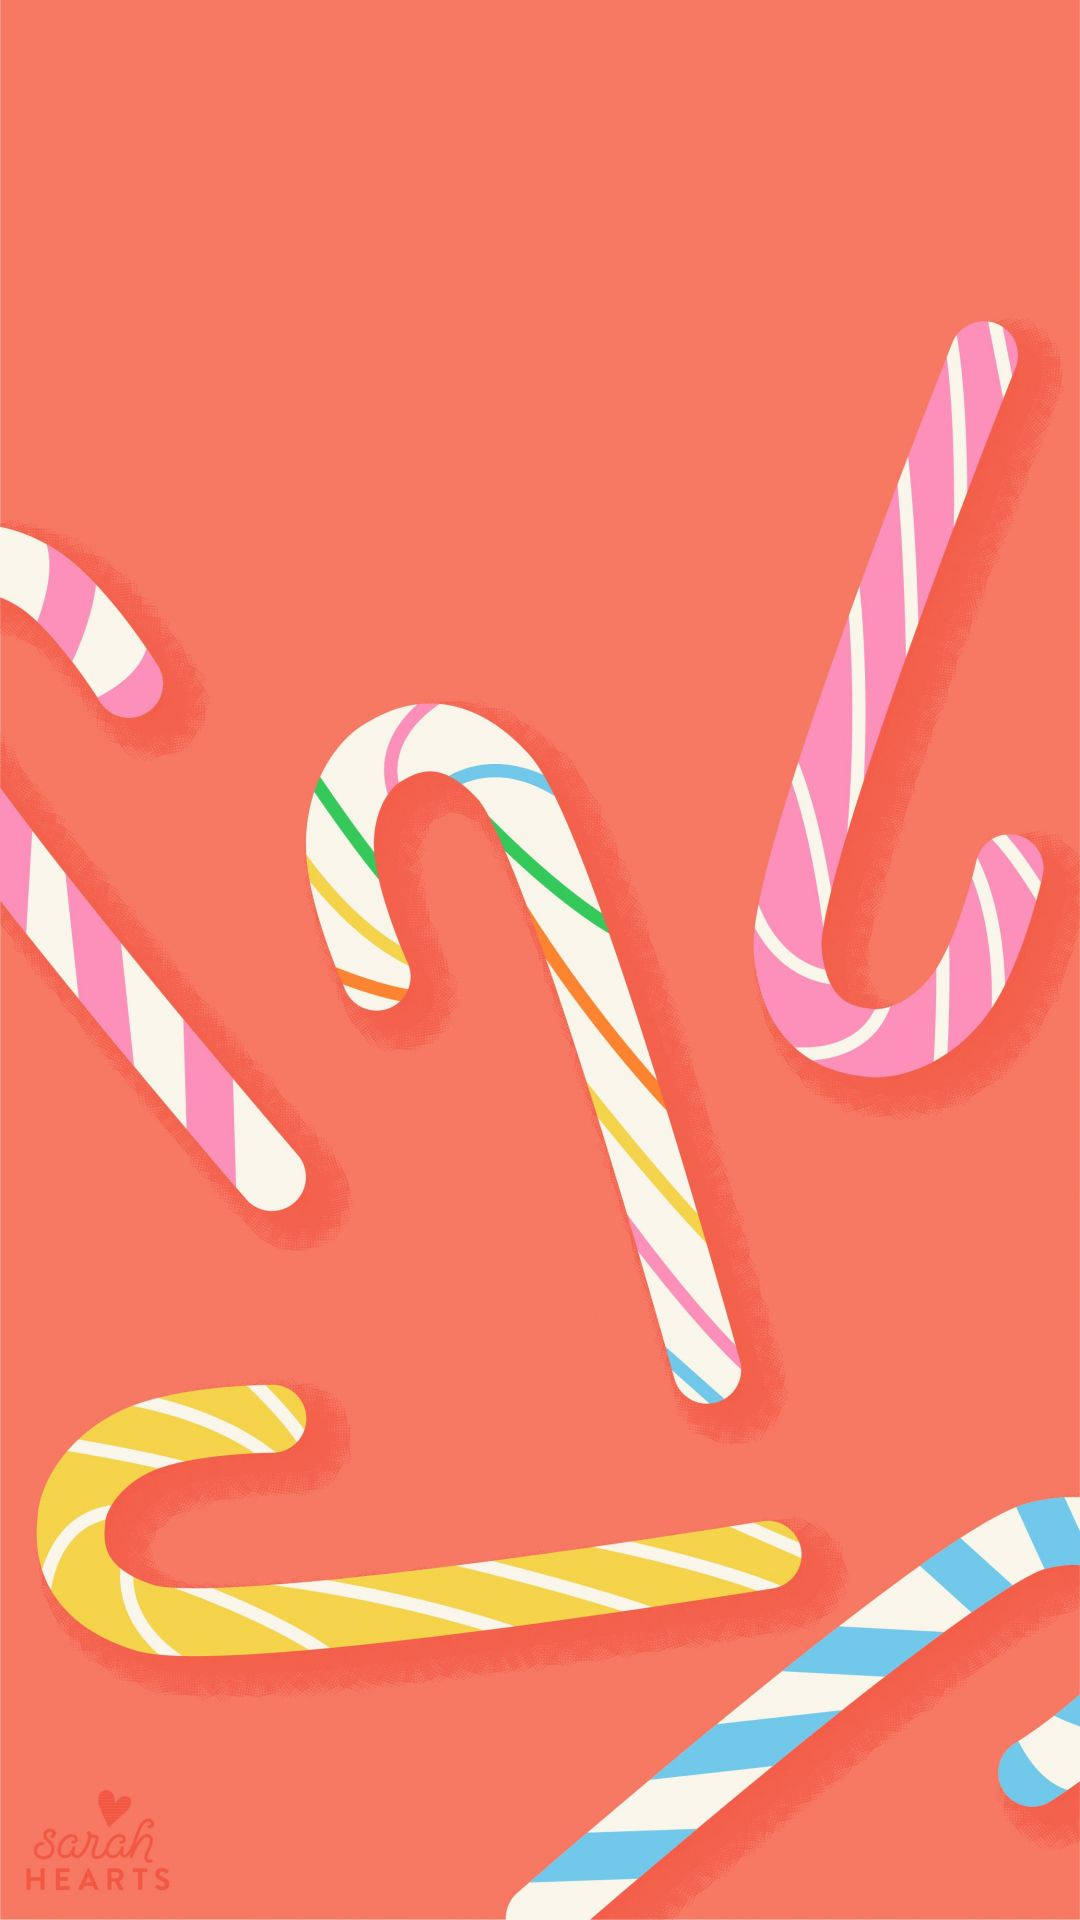 Candy Cane Colorful Graphic